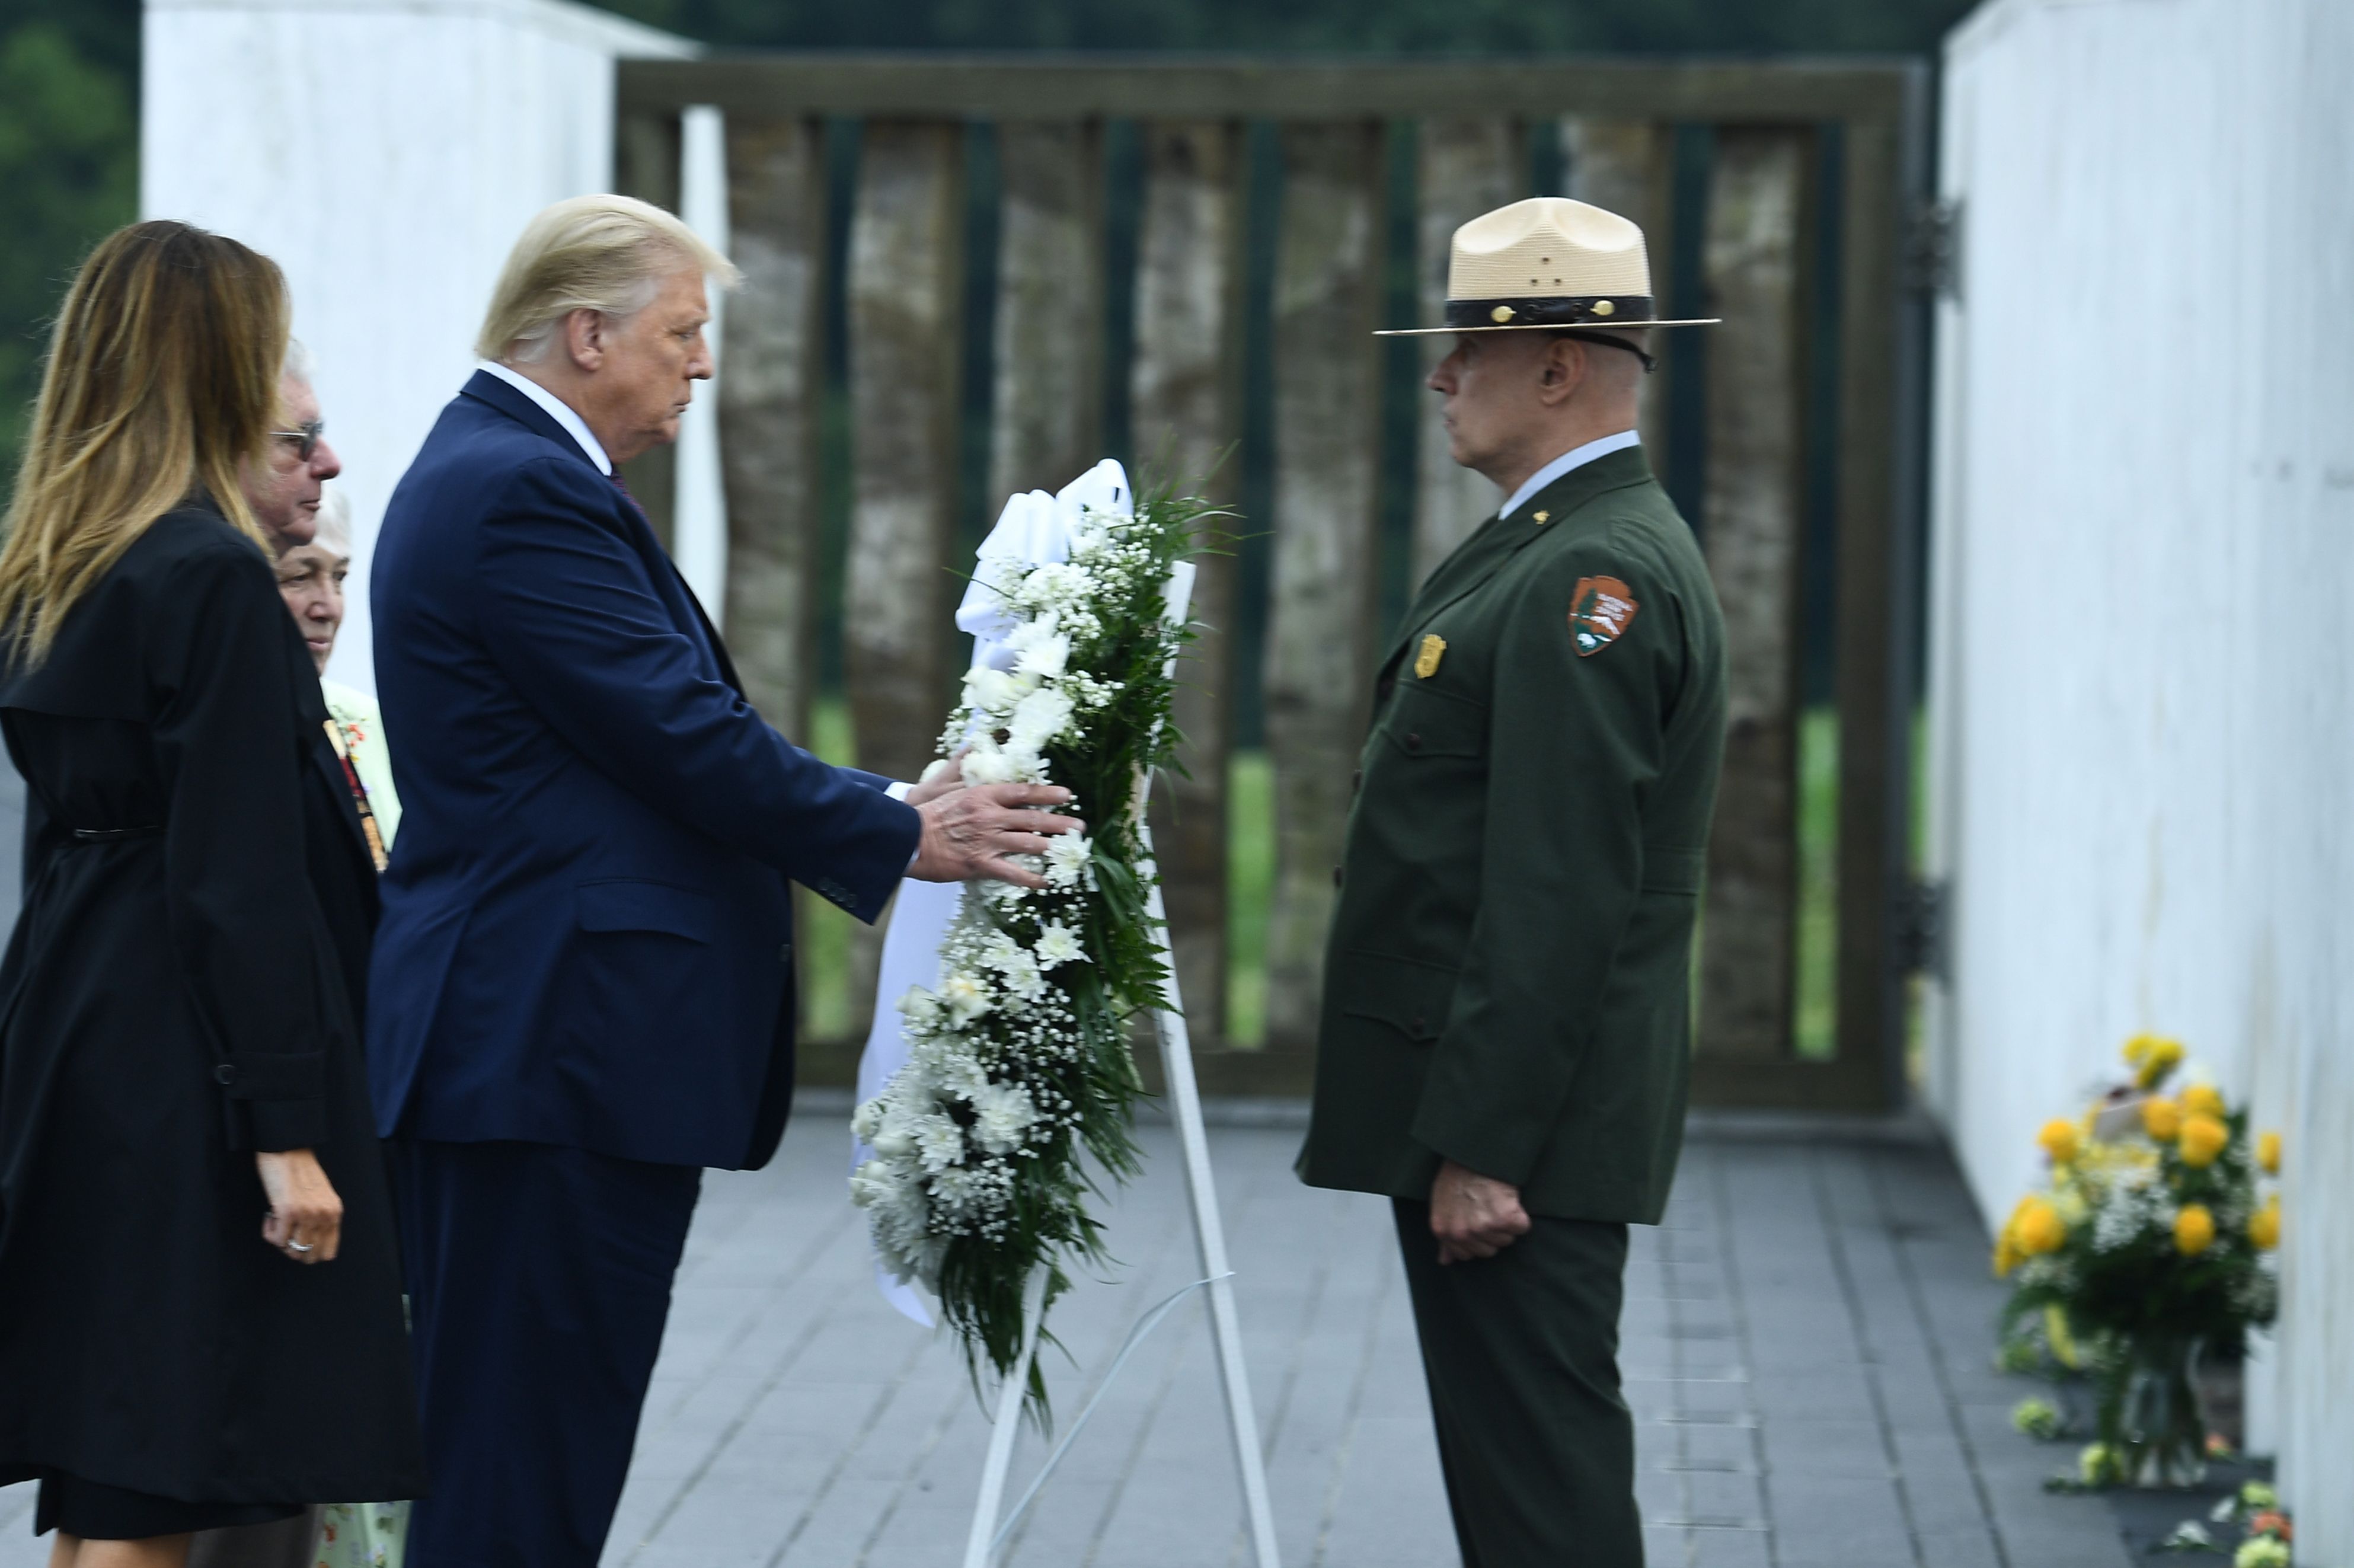 President Trump and First Lady Melania Trump laying a wreath during a ceremony commemorating the 19th anniversary of the 9/11 attacks, in Shanksville, Pennsylvania.